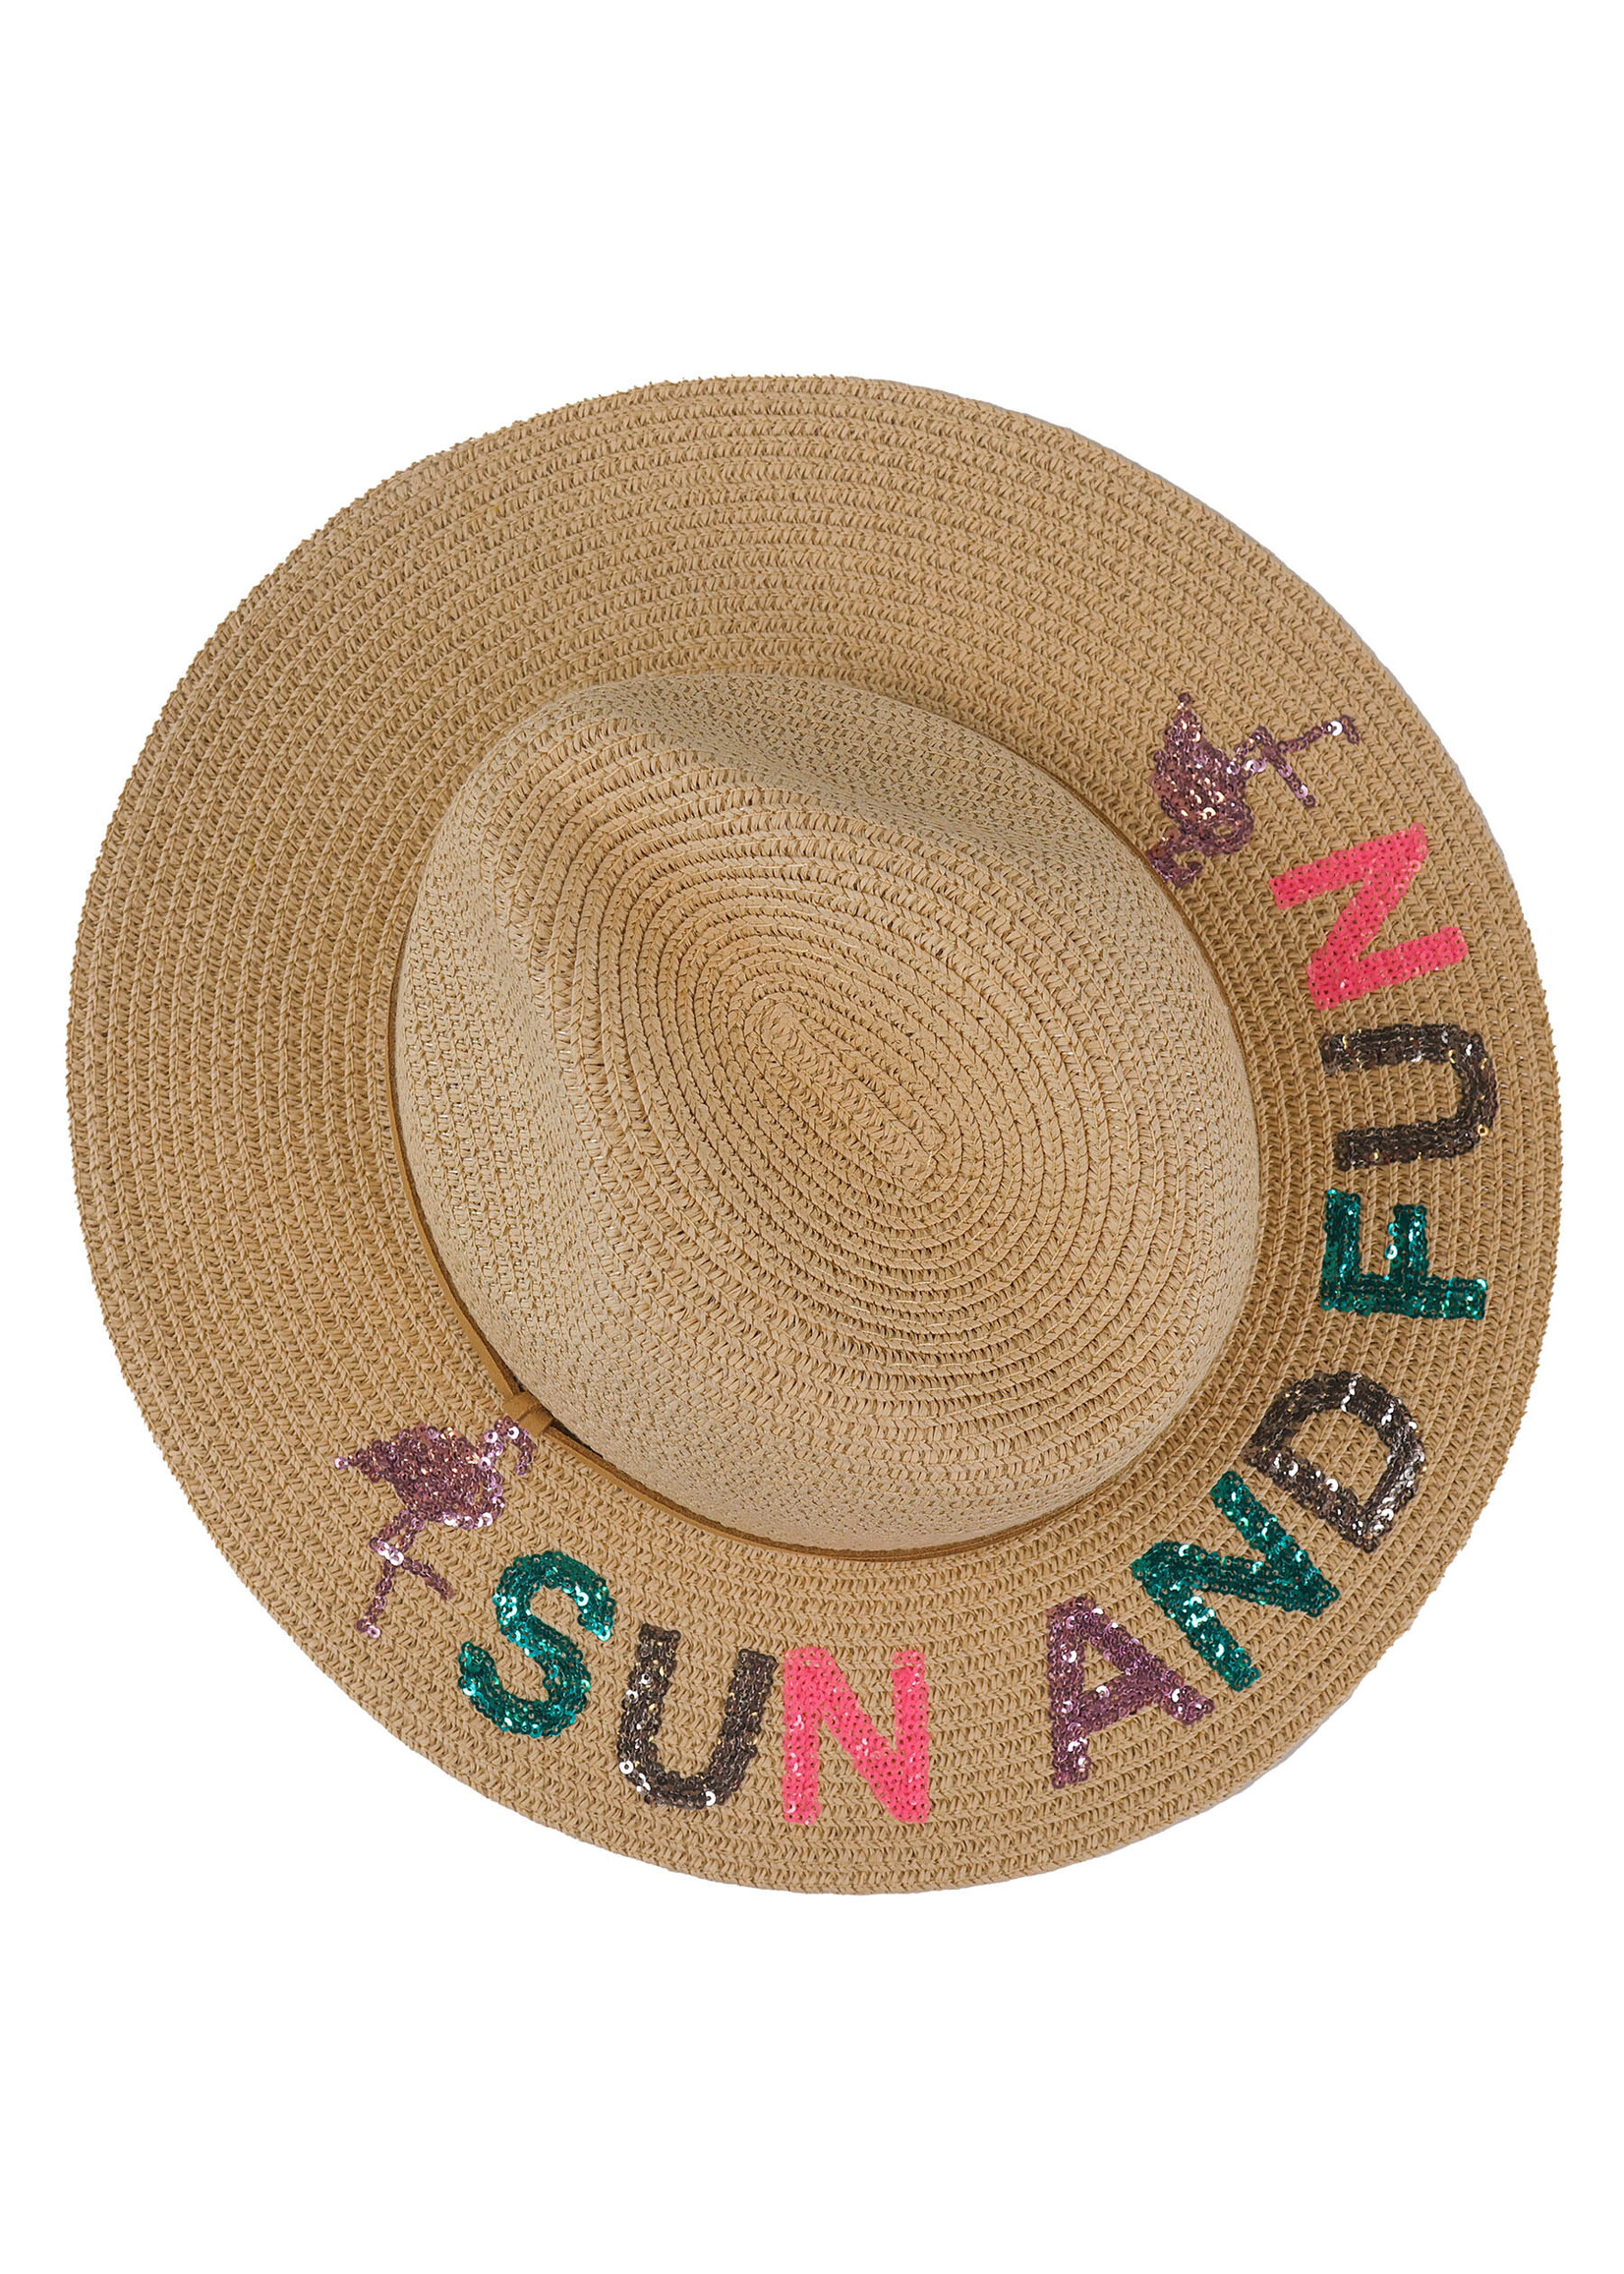 Simply Southern Collection 'Sun & Fun' Beach Hat